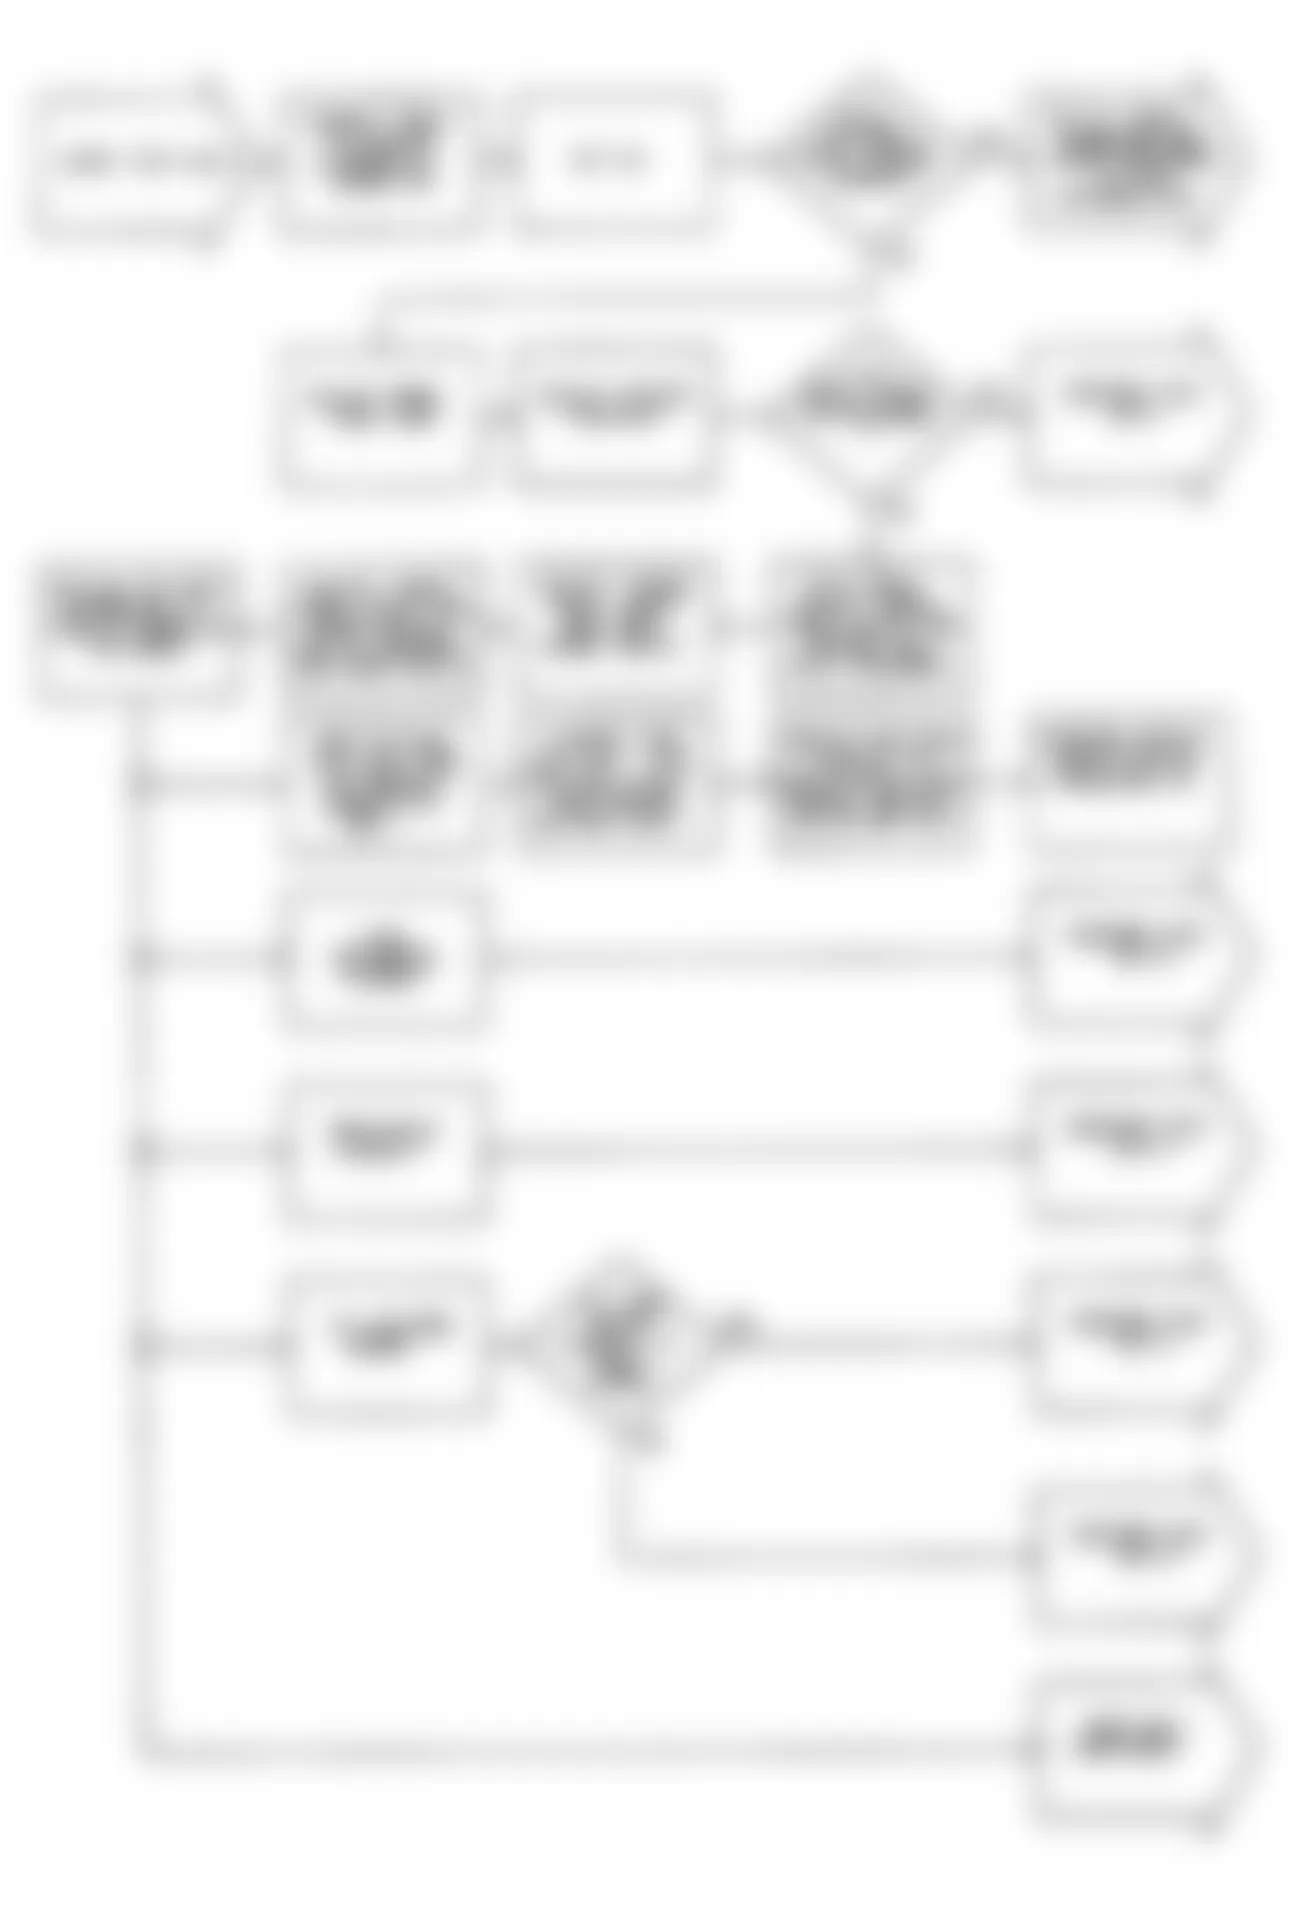 Chrysler LeBaron GTC 1990 - Component Locations -  NS-2: Flow Chart (1 of 2)